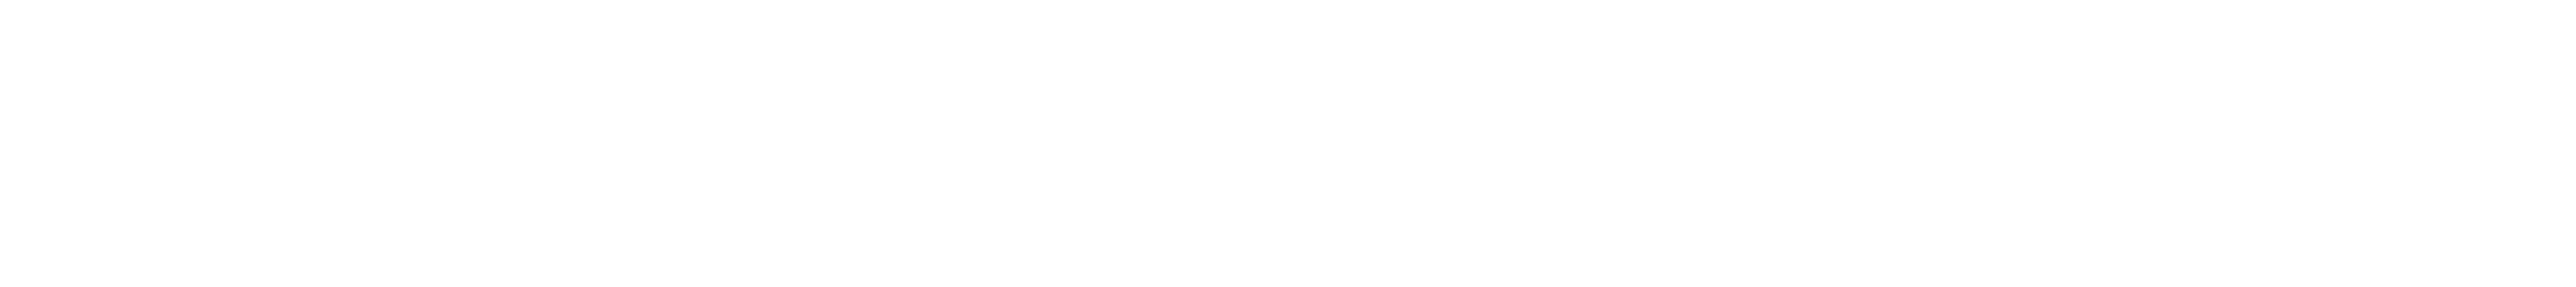 Center for the Advancement of Diagnostics for a Just Society